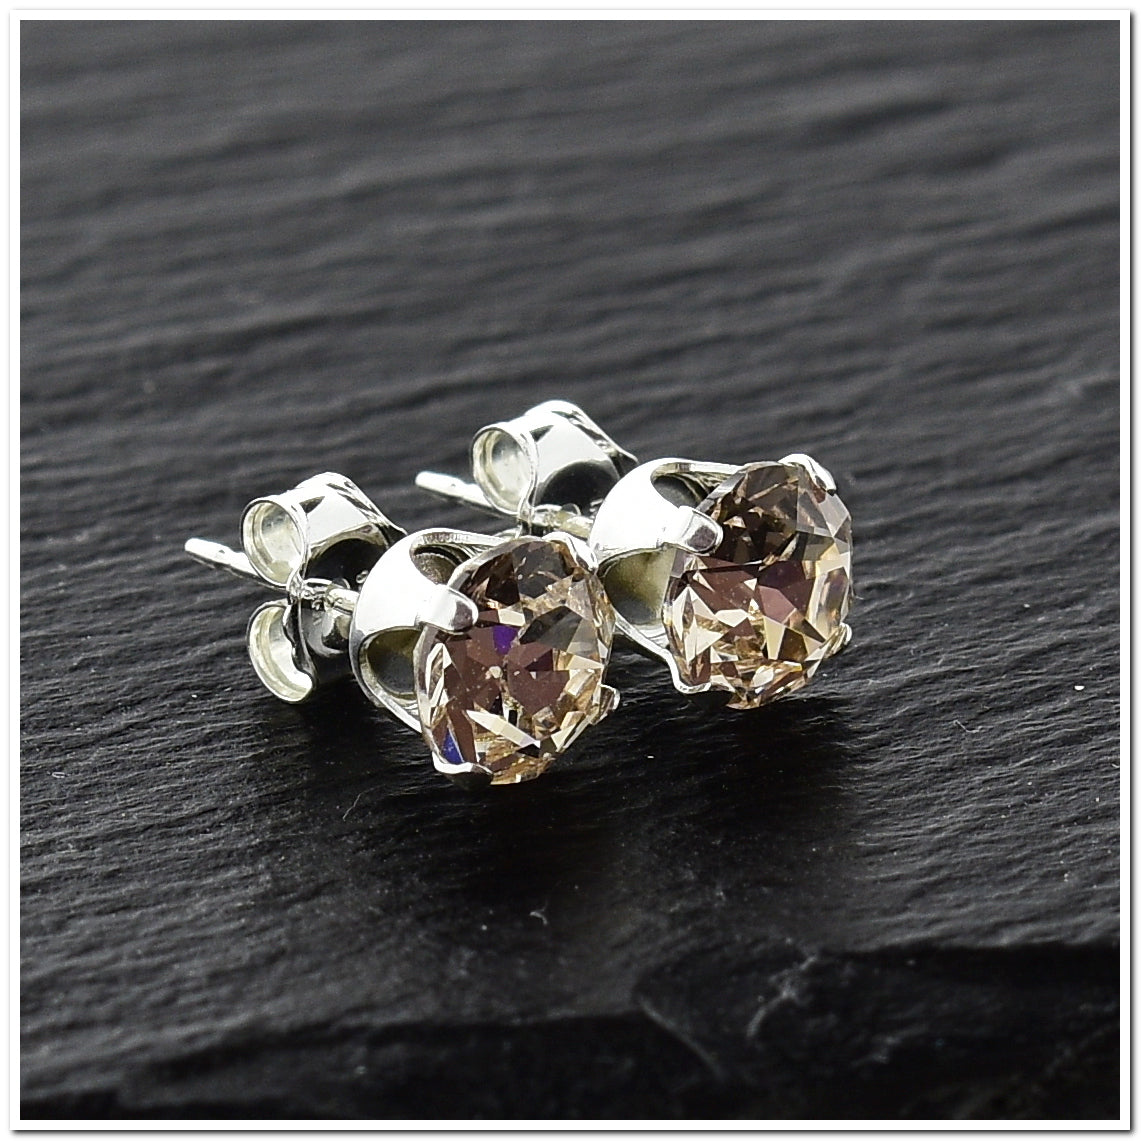 pewterhooter® Women's Classic Collection 925 Sterling silver earrings with sparkling Light Silk crystals, packaged in a gift box for any occasion.